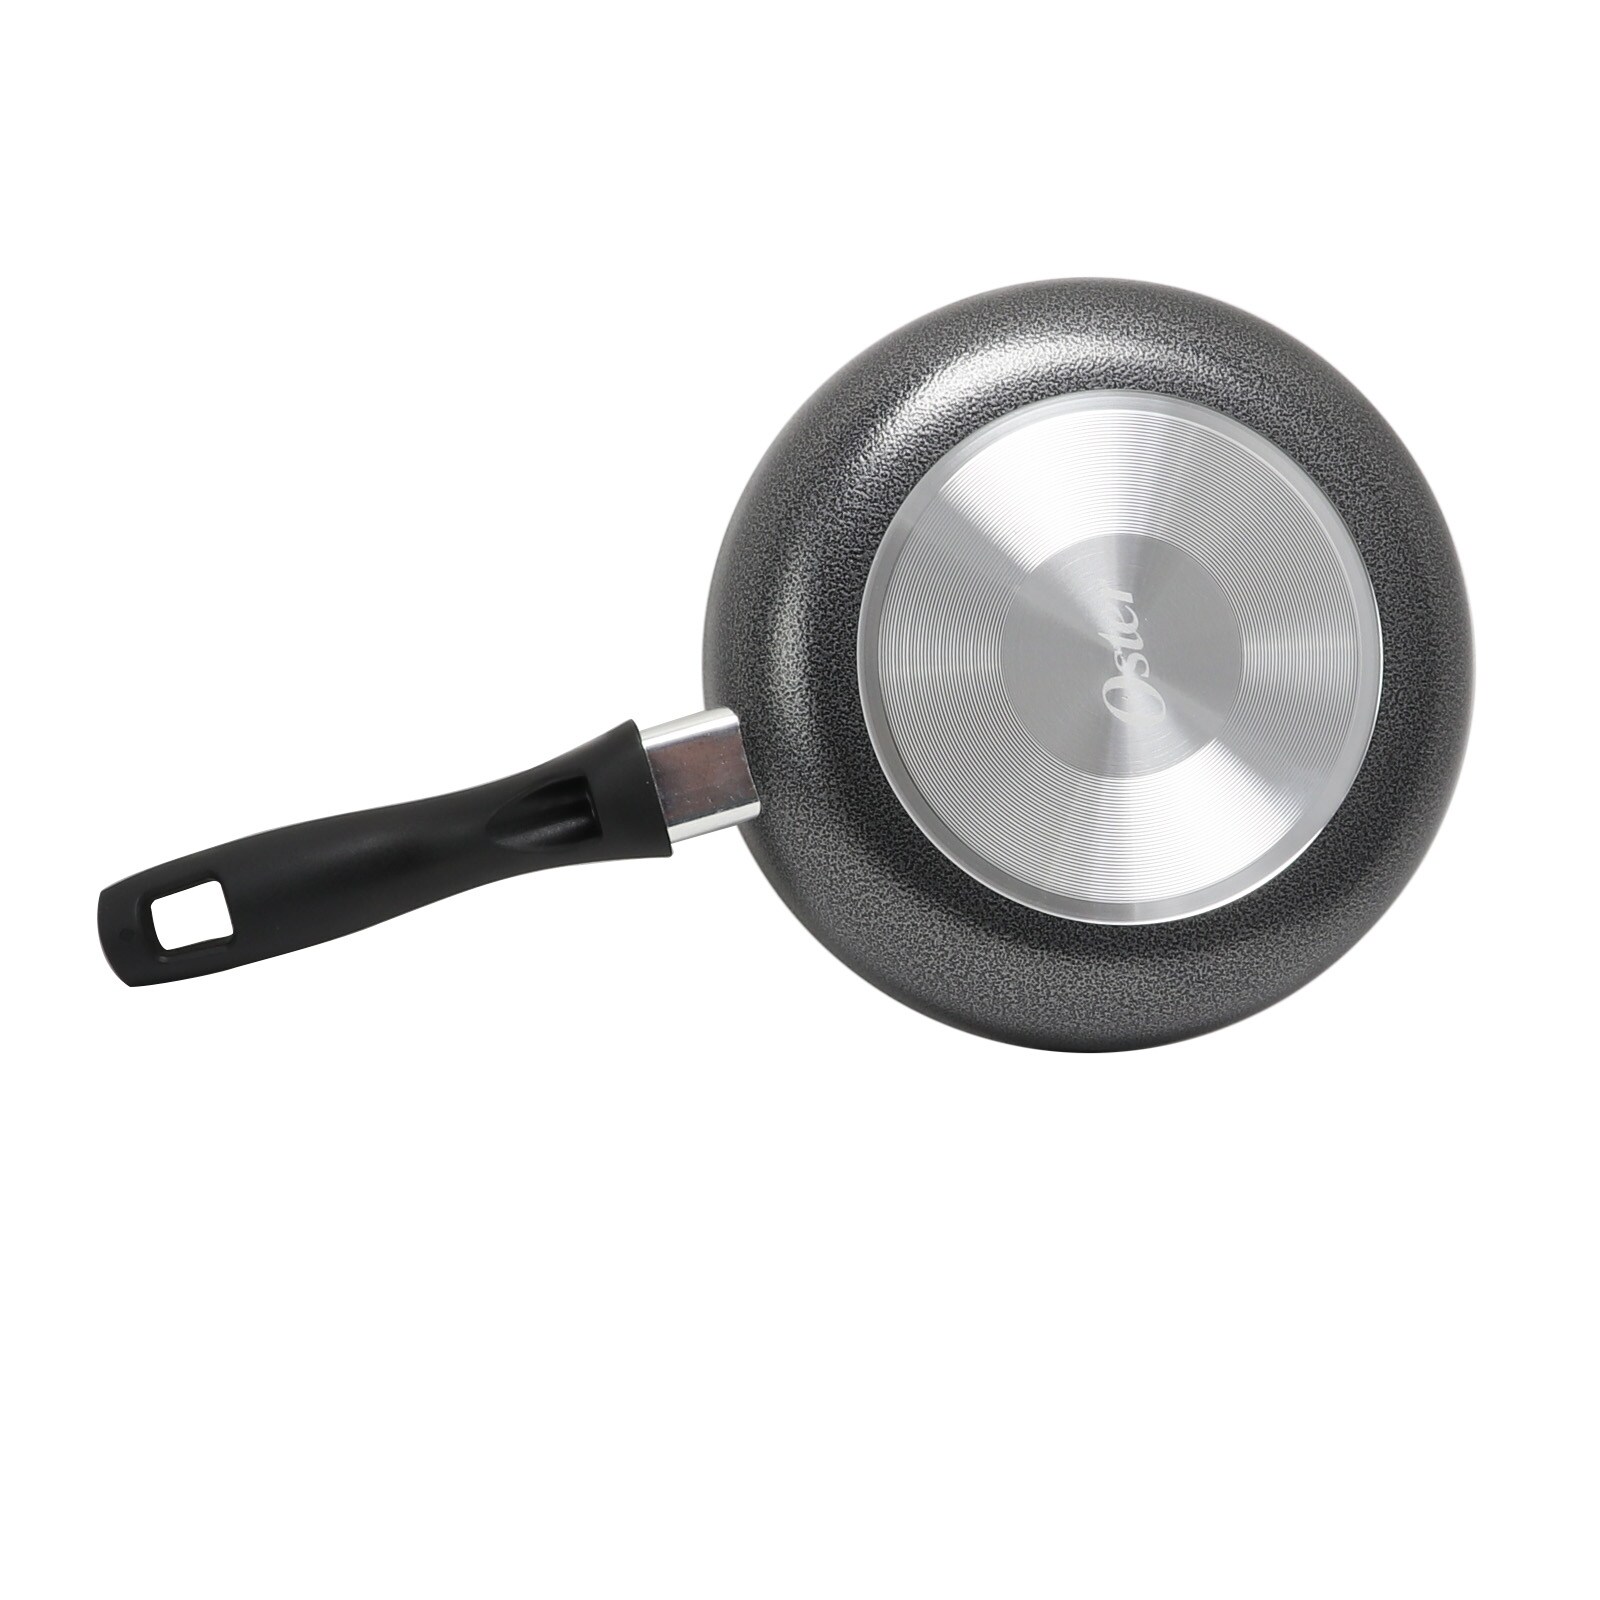 https://ak1.ostkcdn.com/images/products/is/images/direct/dd0ba0cdef4b52540a8b785bb30a2ca528a39af5/Oster-Clairborne-8-Inch-Aluminum-Frying-Pan-in-Charcoal-Grey.jpg